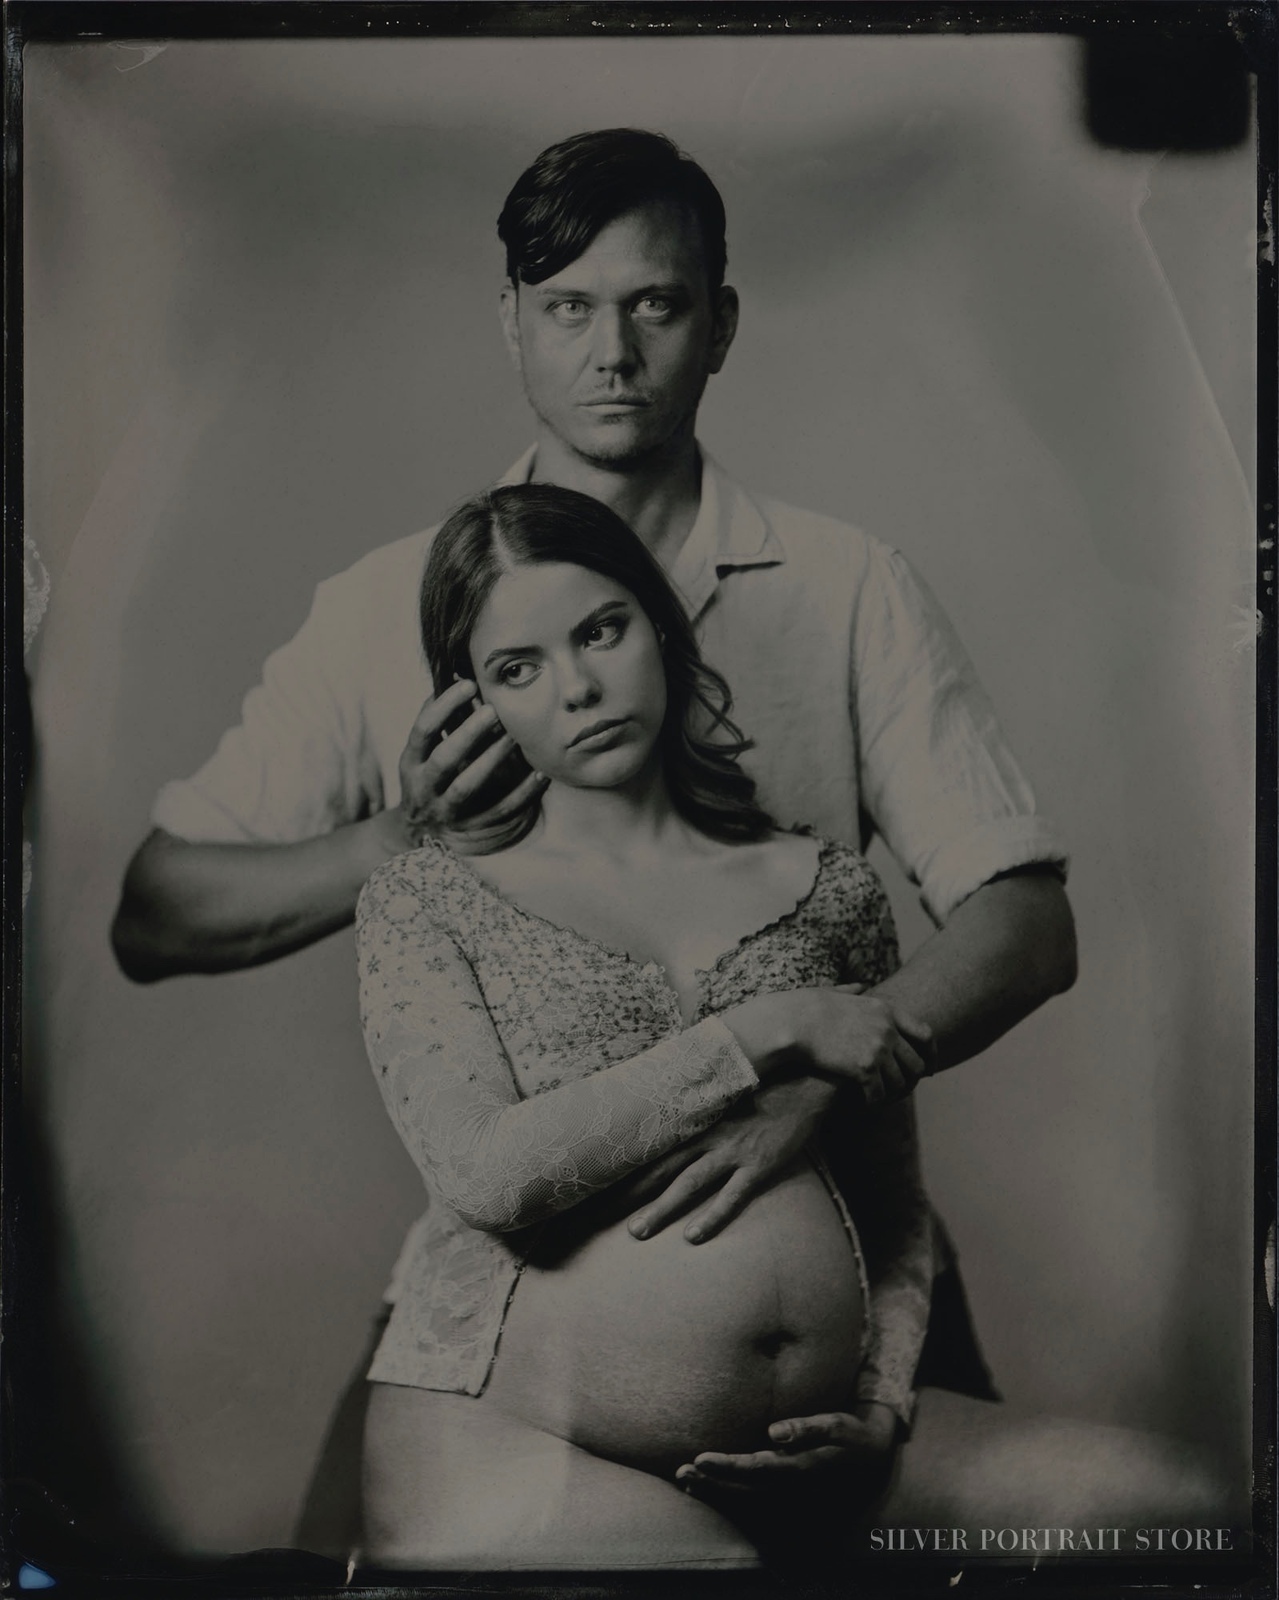 Laura & Douwe-Silver Portrait Store-Wet plate collodion-Tintype 10 x 12 cm.